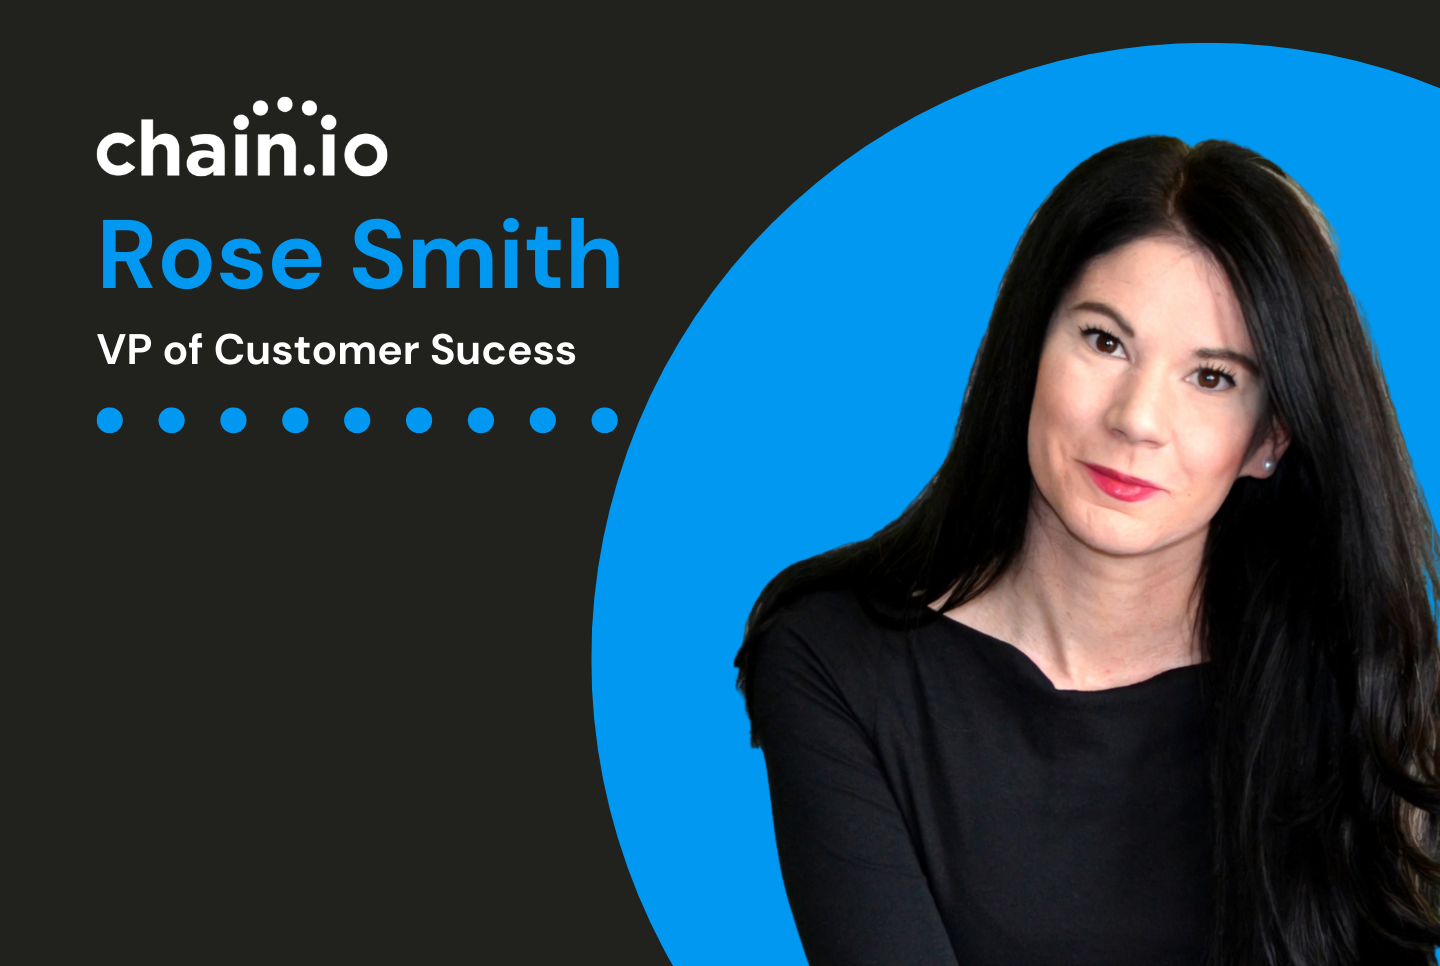 Chain.io Welcomes Rose Smith as the Vice President of Customer Success